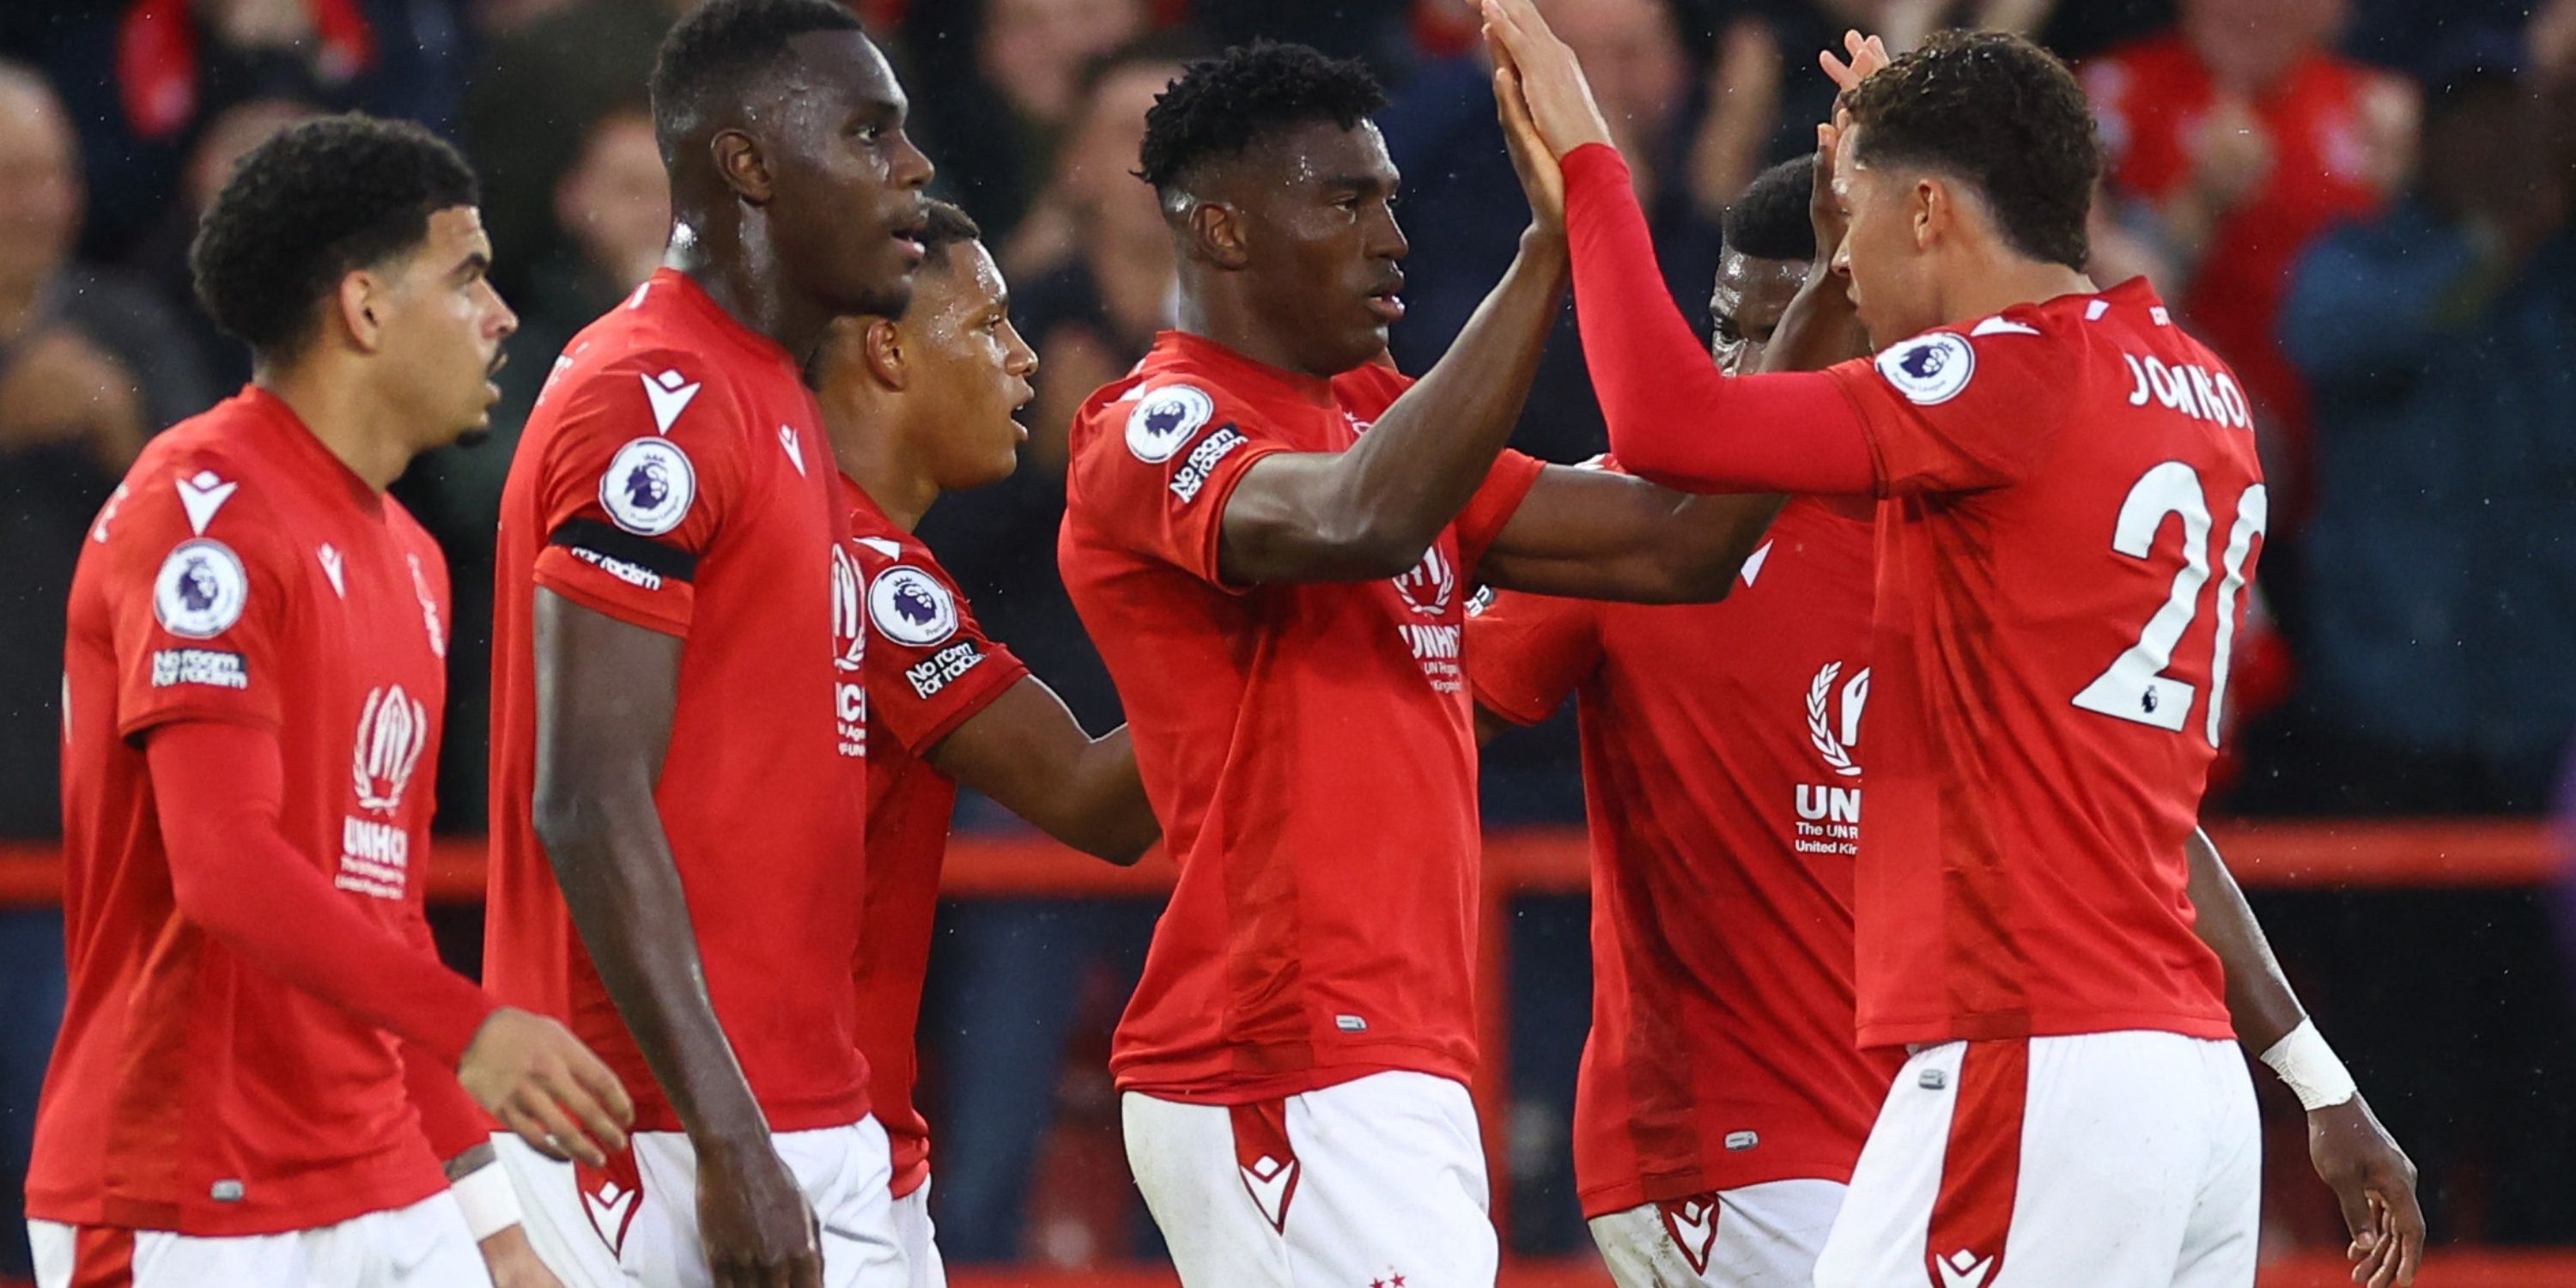 Awoniyi replacement found in Nottingham Forest's dream starting XI after Jan